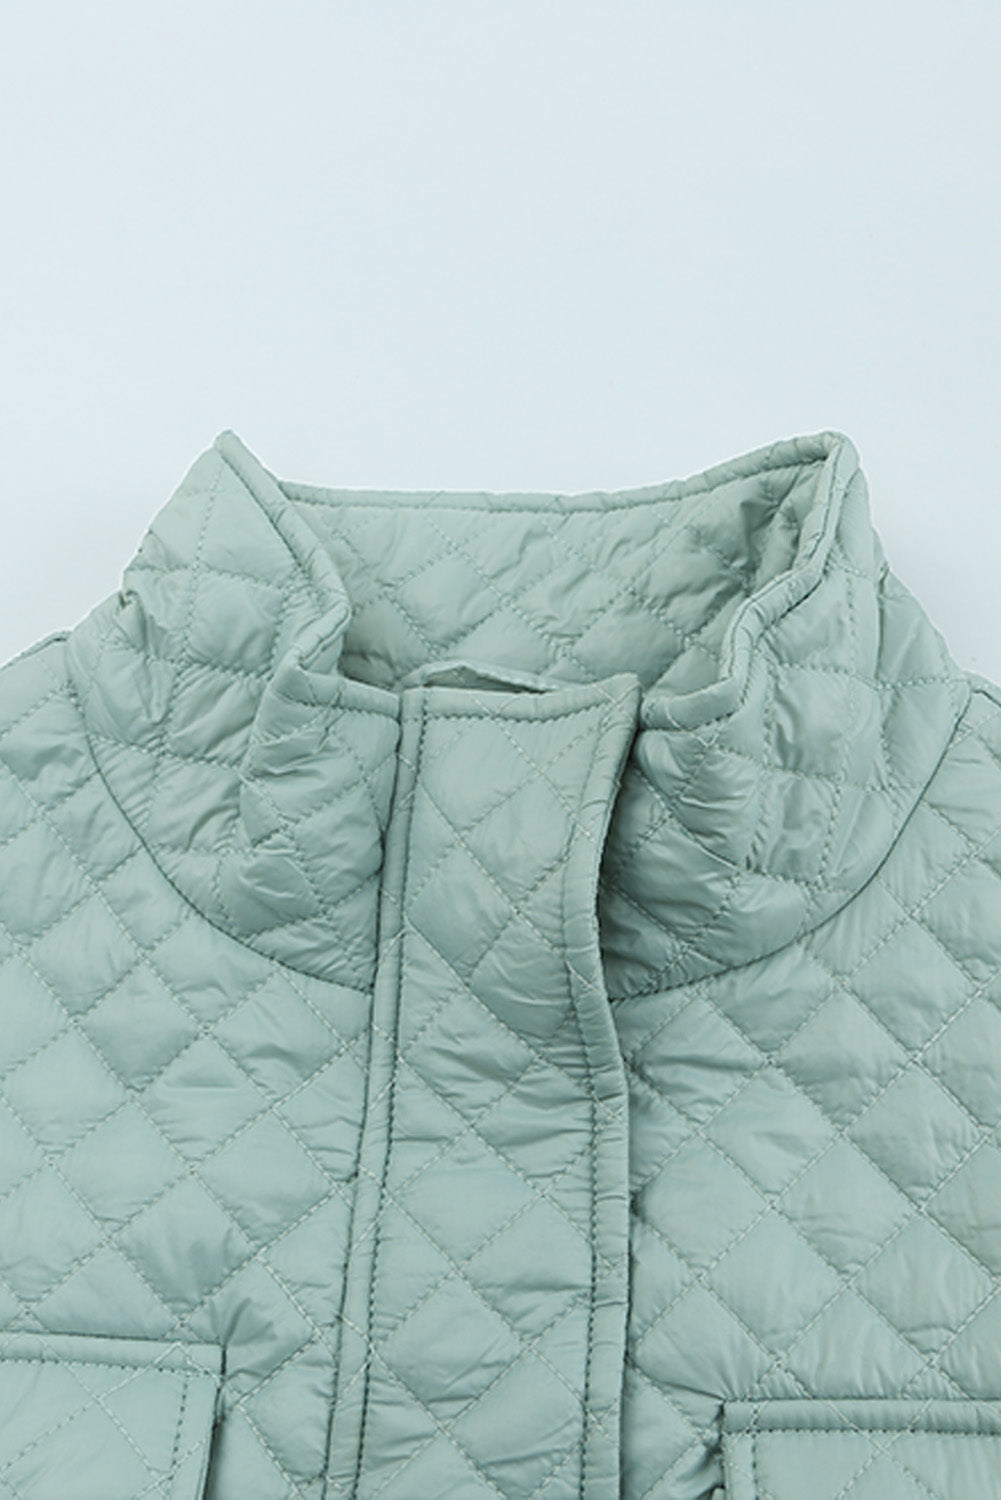 - Quilted Pocketed Zip-up Cropped Jacket - 2 colors - womens jacket at TFC&H Co.